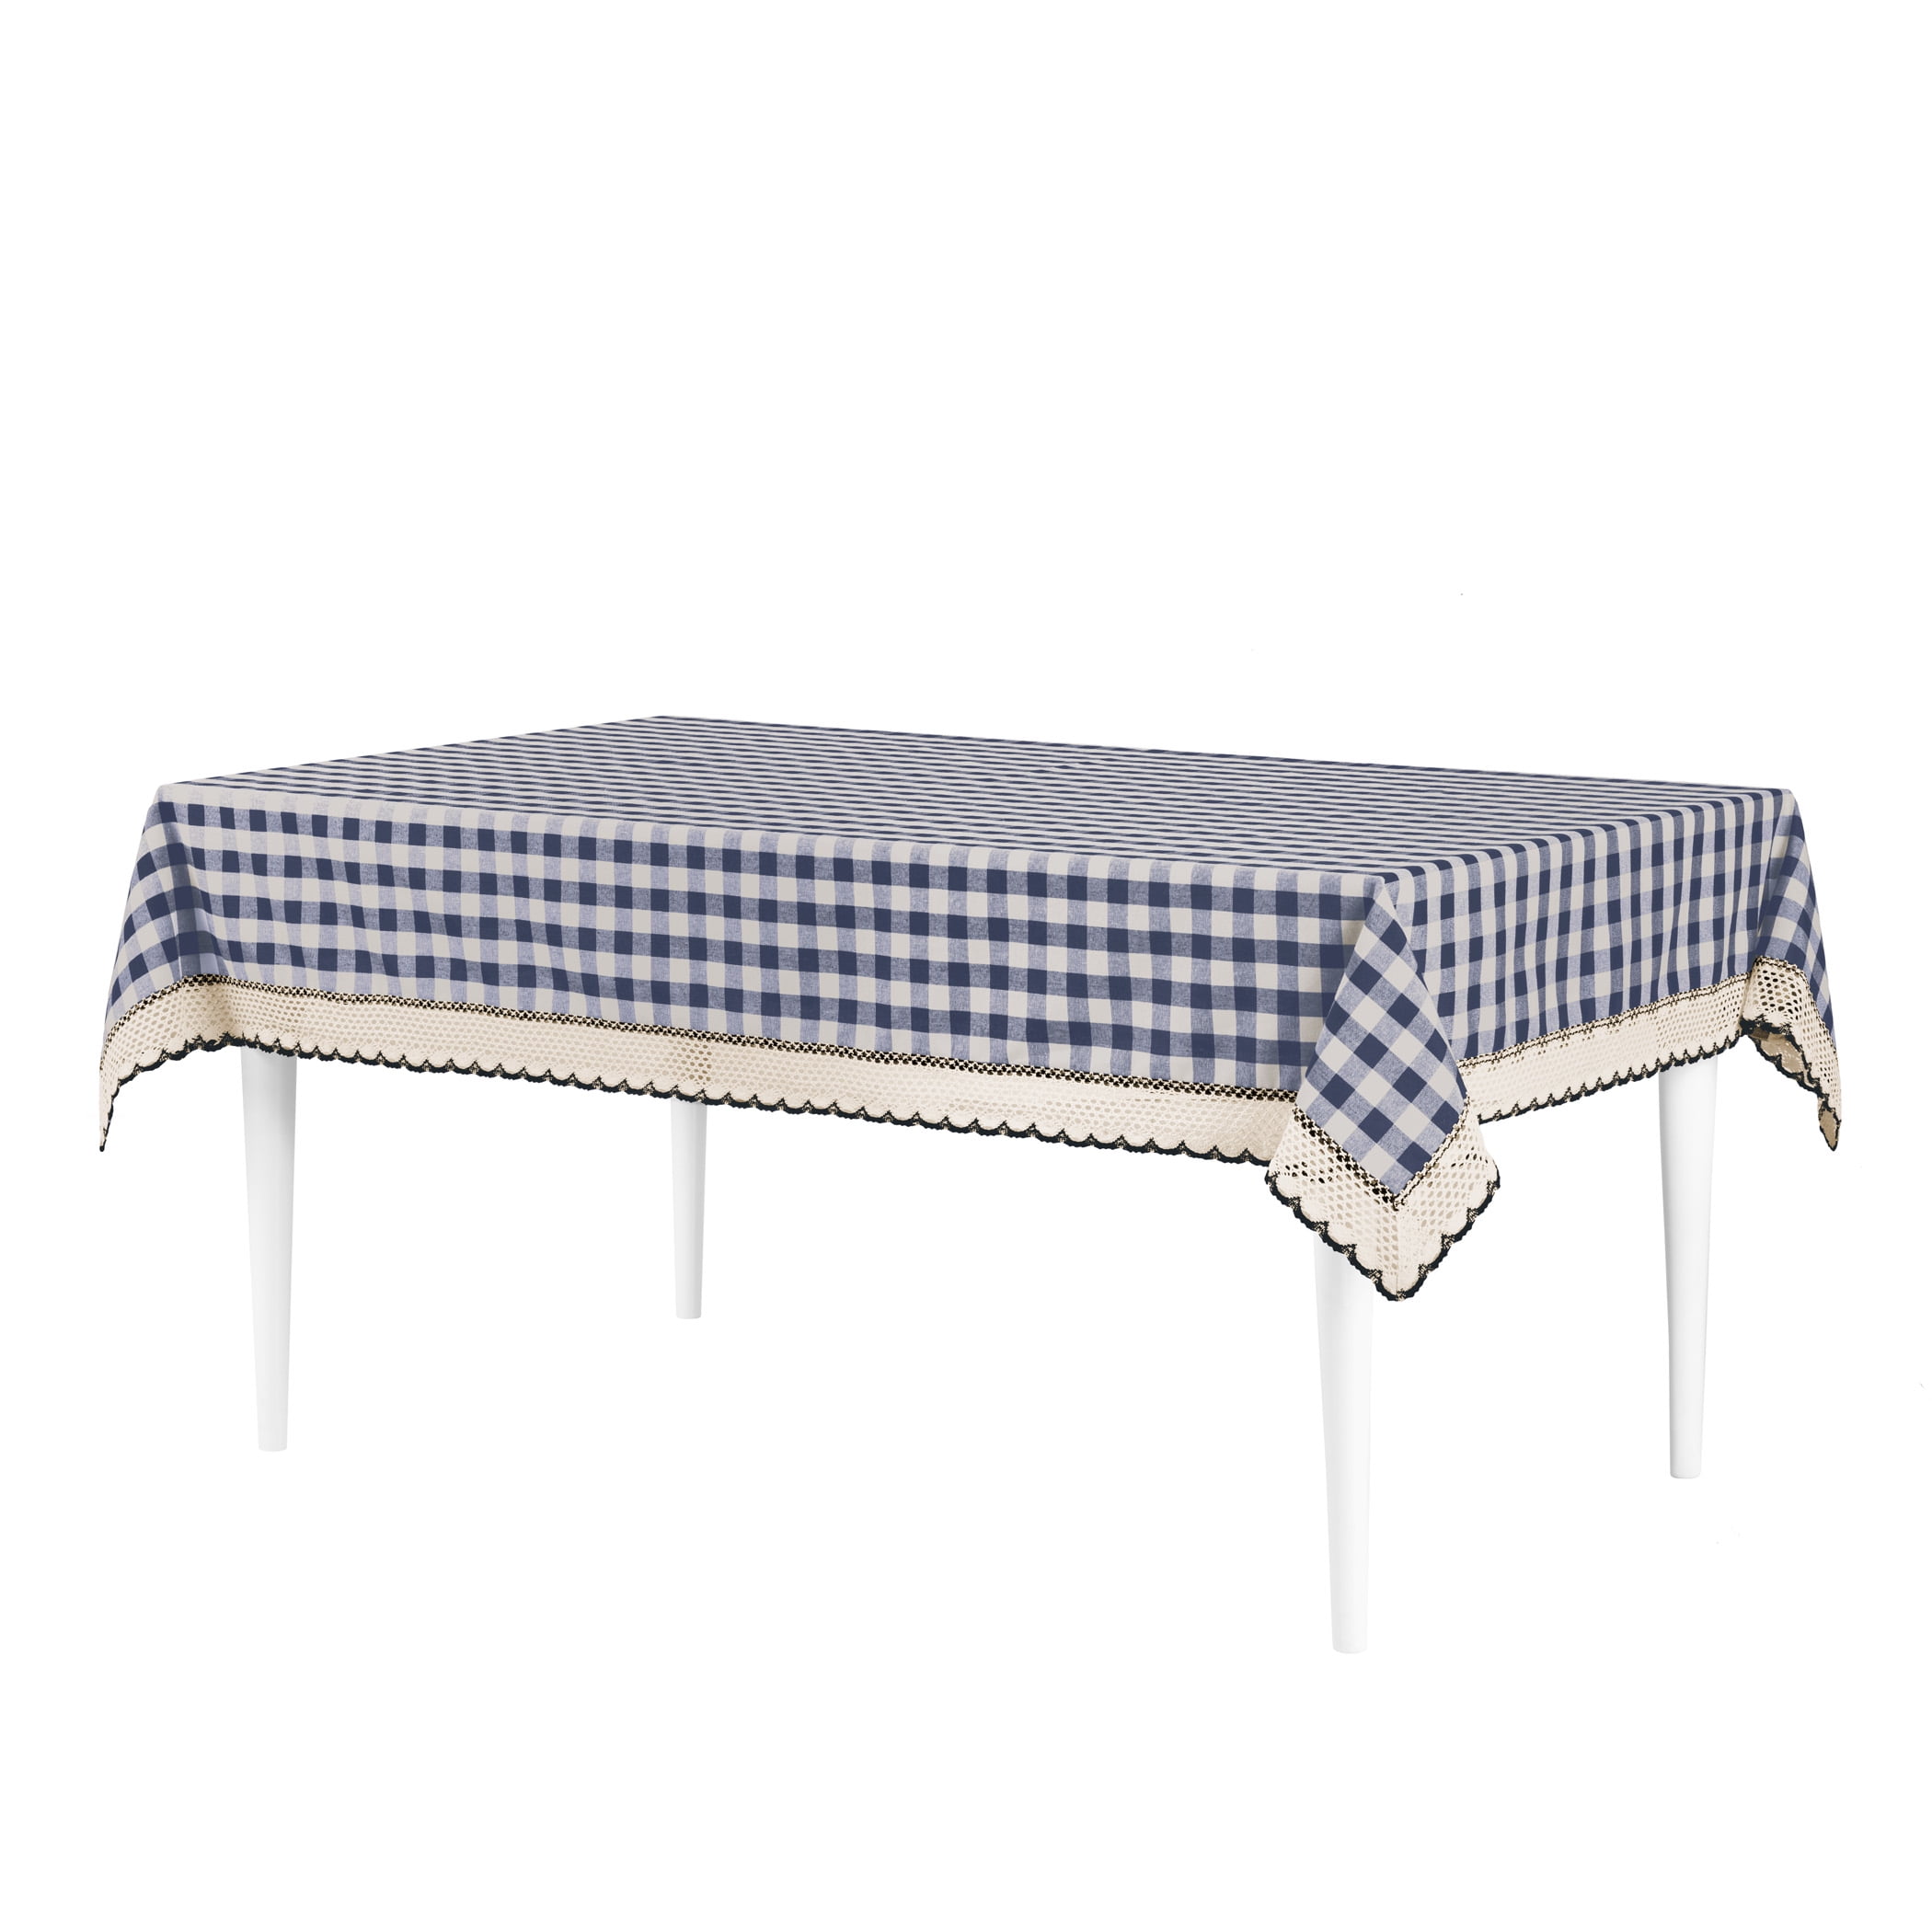 Picture of Achim BCT120NY24 60 x 120 in. Buffalo Check Tablecloth with Macram Trim Navy